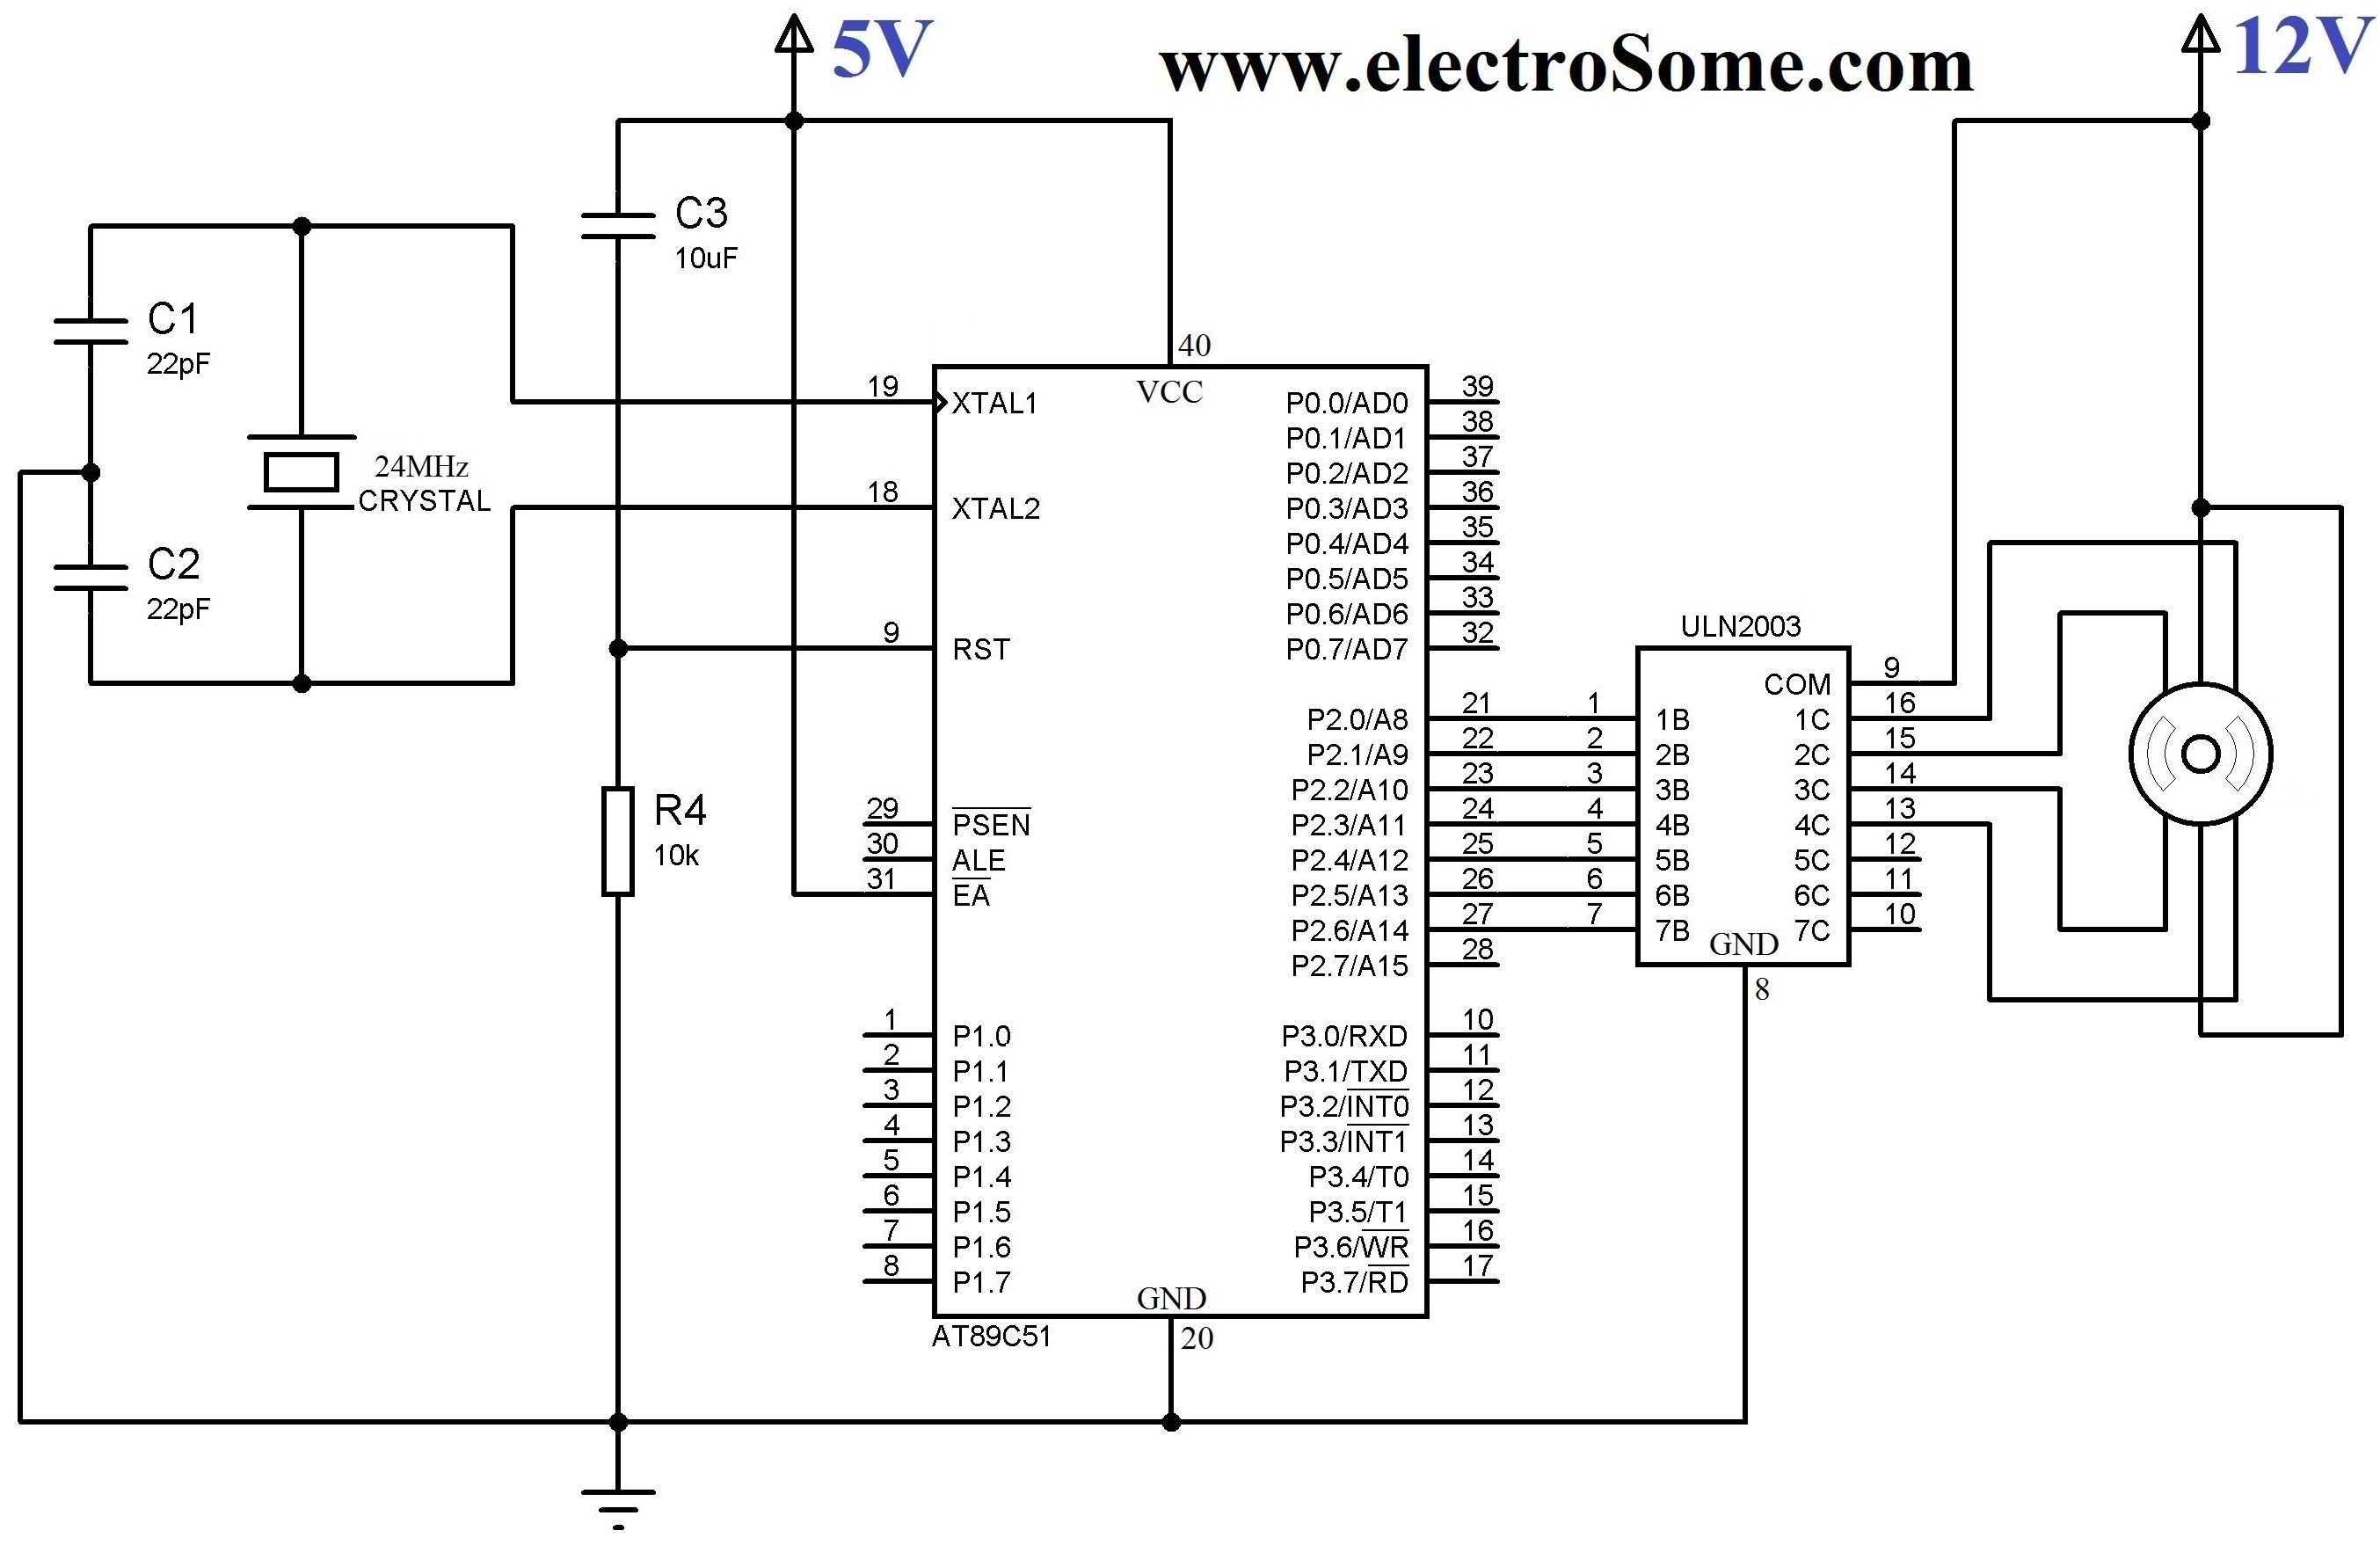 Home Wiring Connection Diagram Inspirationa Wiring Diagram for Electrical Contactor Fresh Circuit Diagram